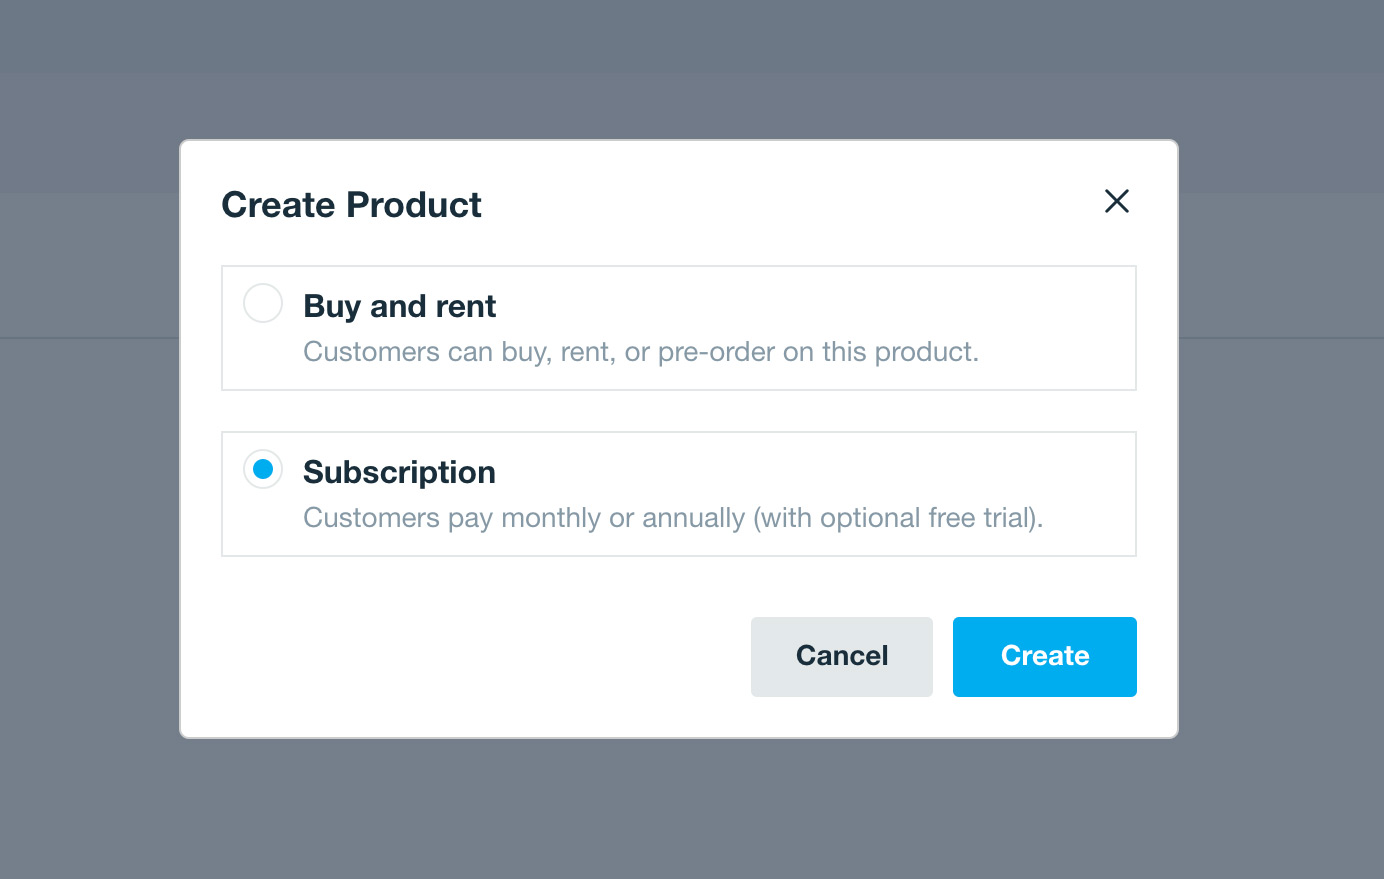 create_product_modal_window_with_subscription_selected.jpeg